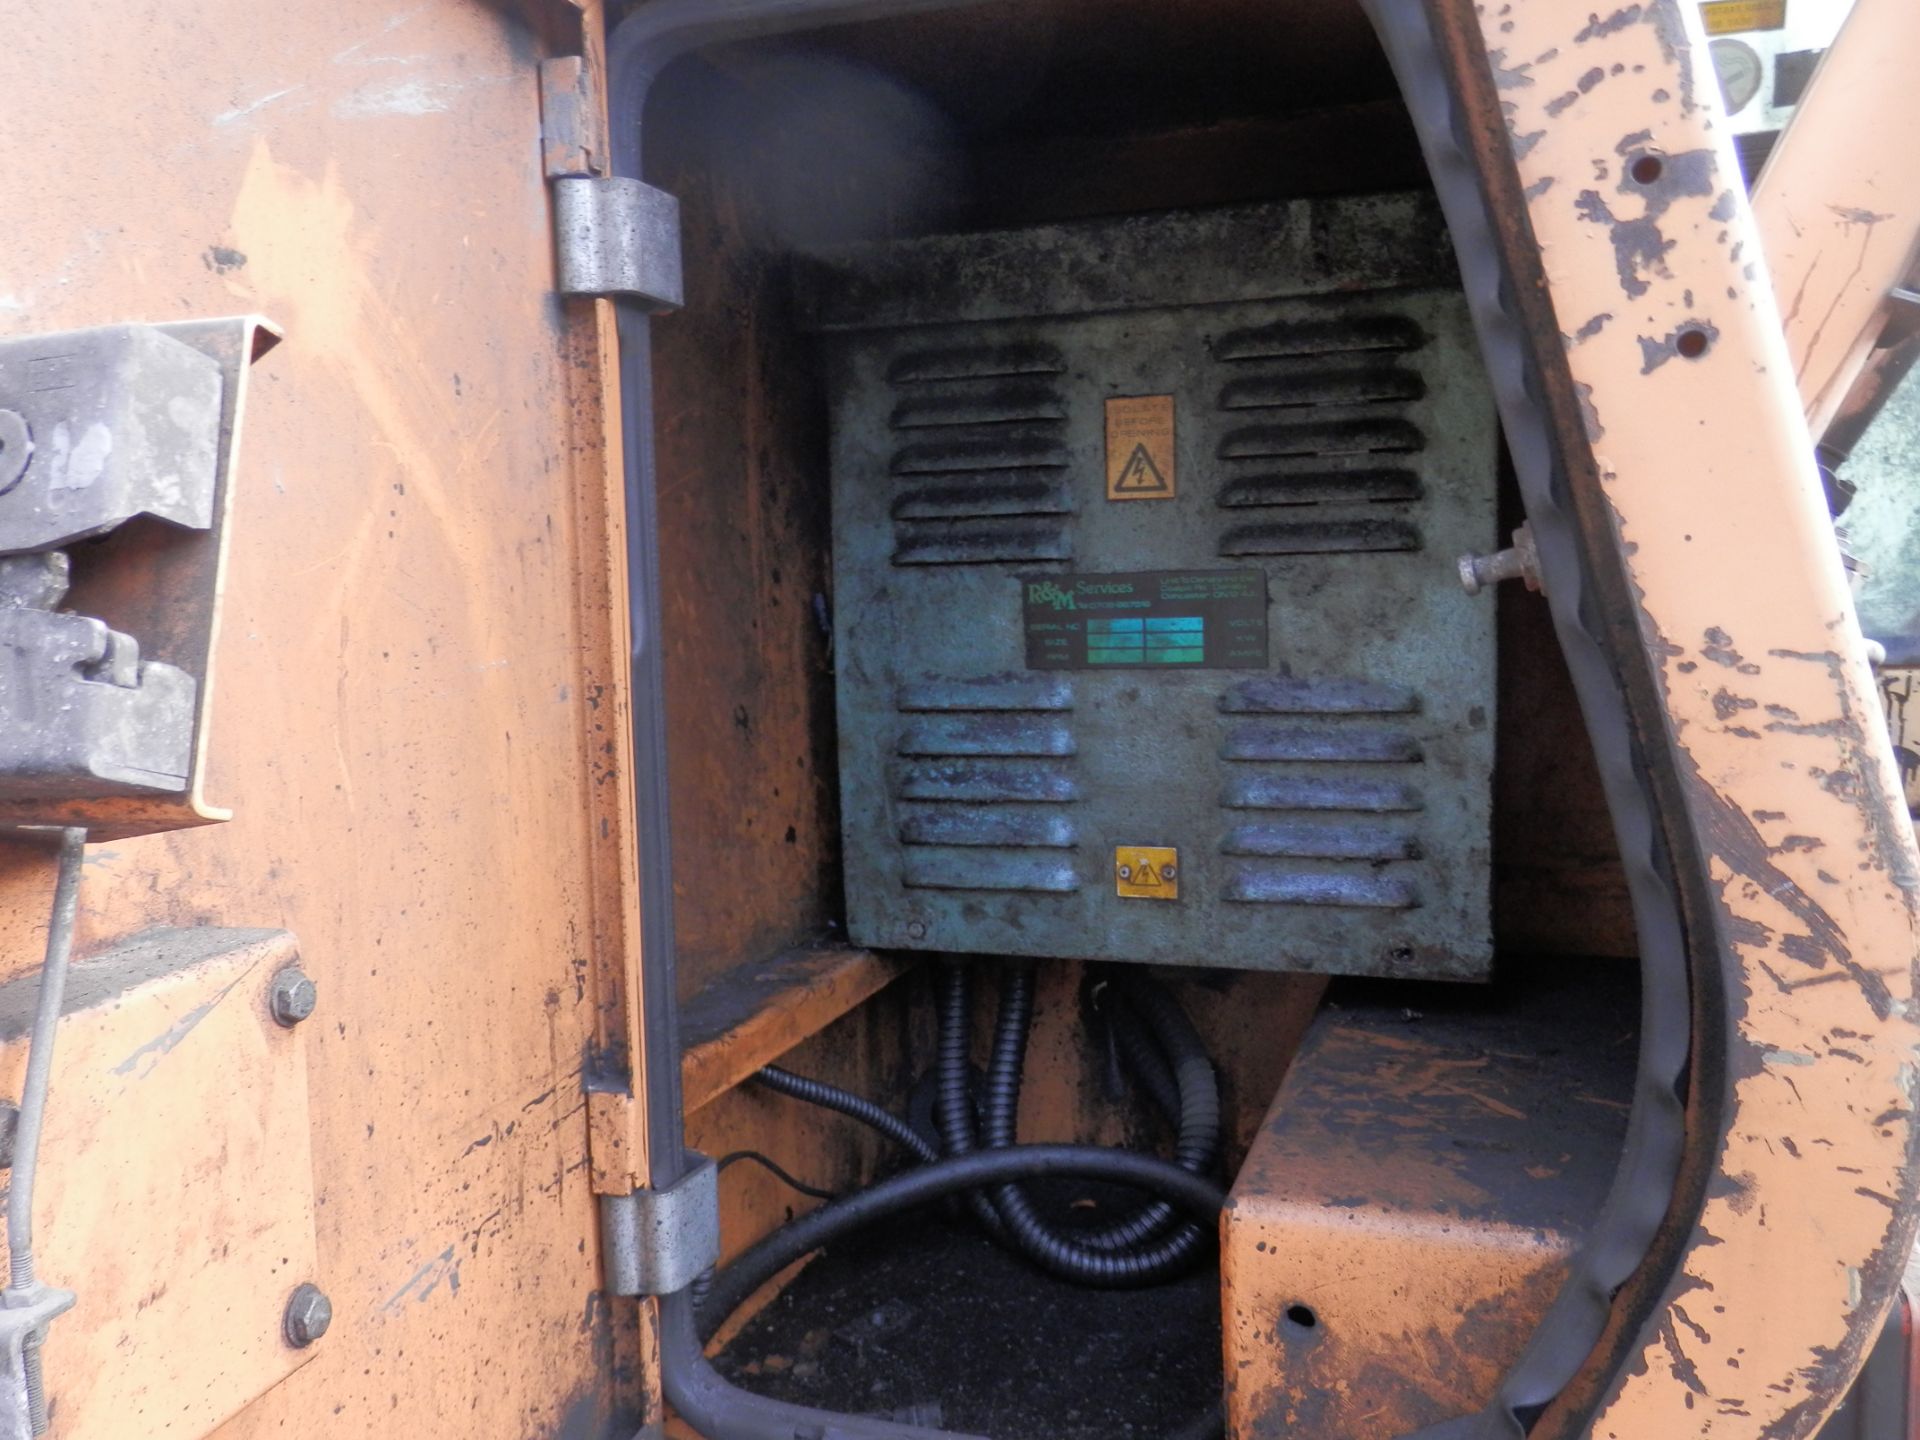 ALL WORKING CASE 688BP 17.2 TONNE DIGGER, 65KW DIESEL ENGINE & MAGNETIC LIFT ATTACHMENT INCLUDED. - Image 16 of 18